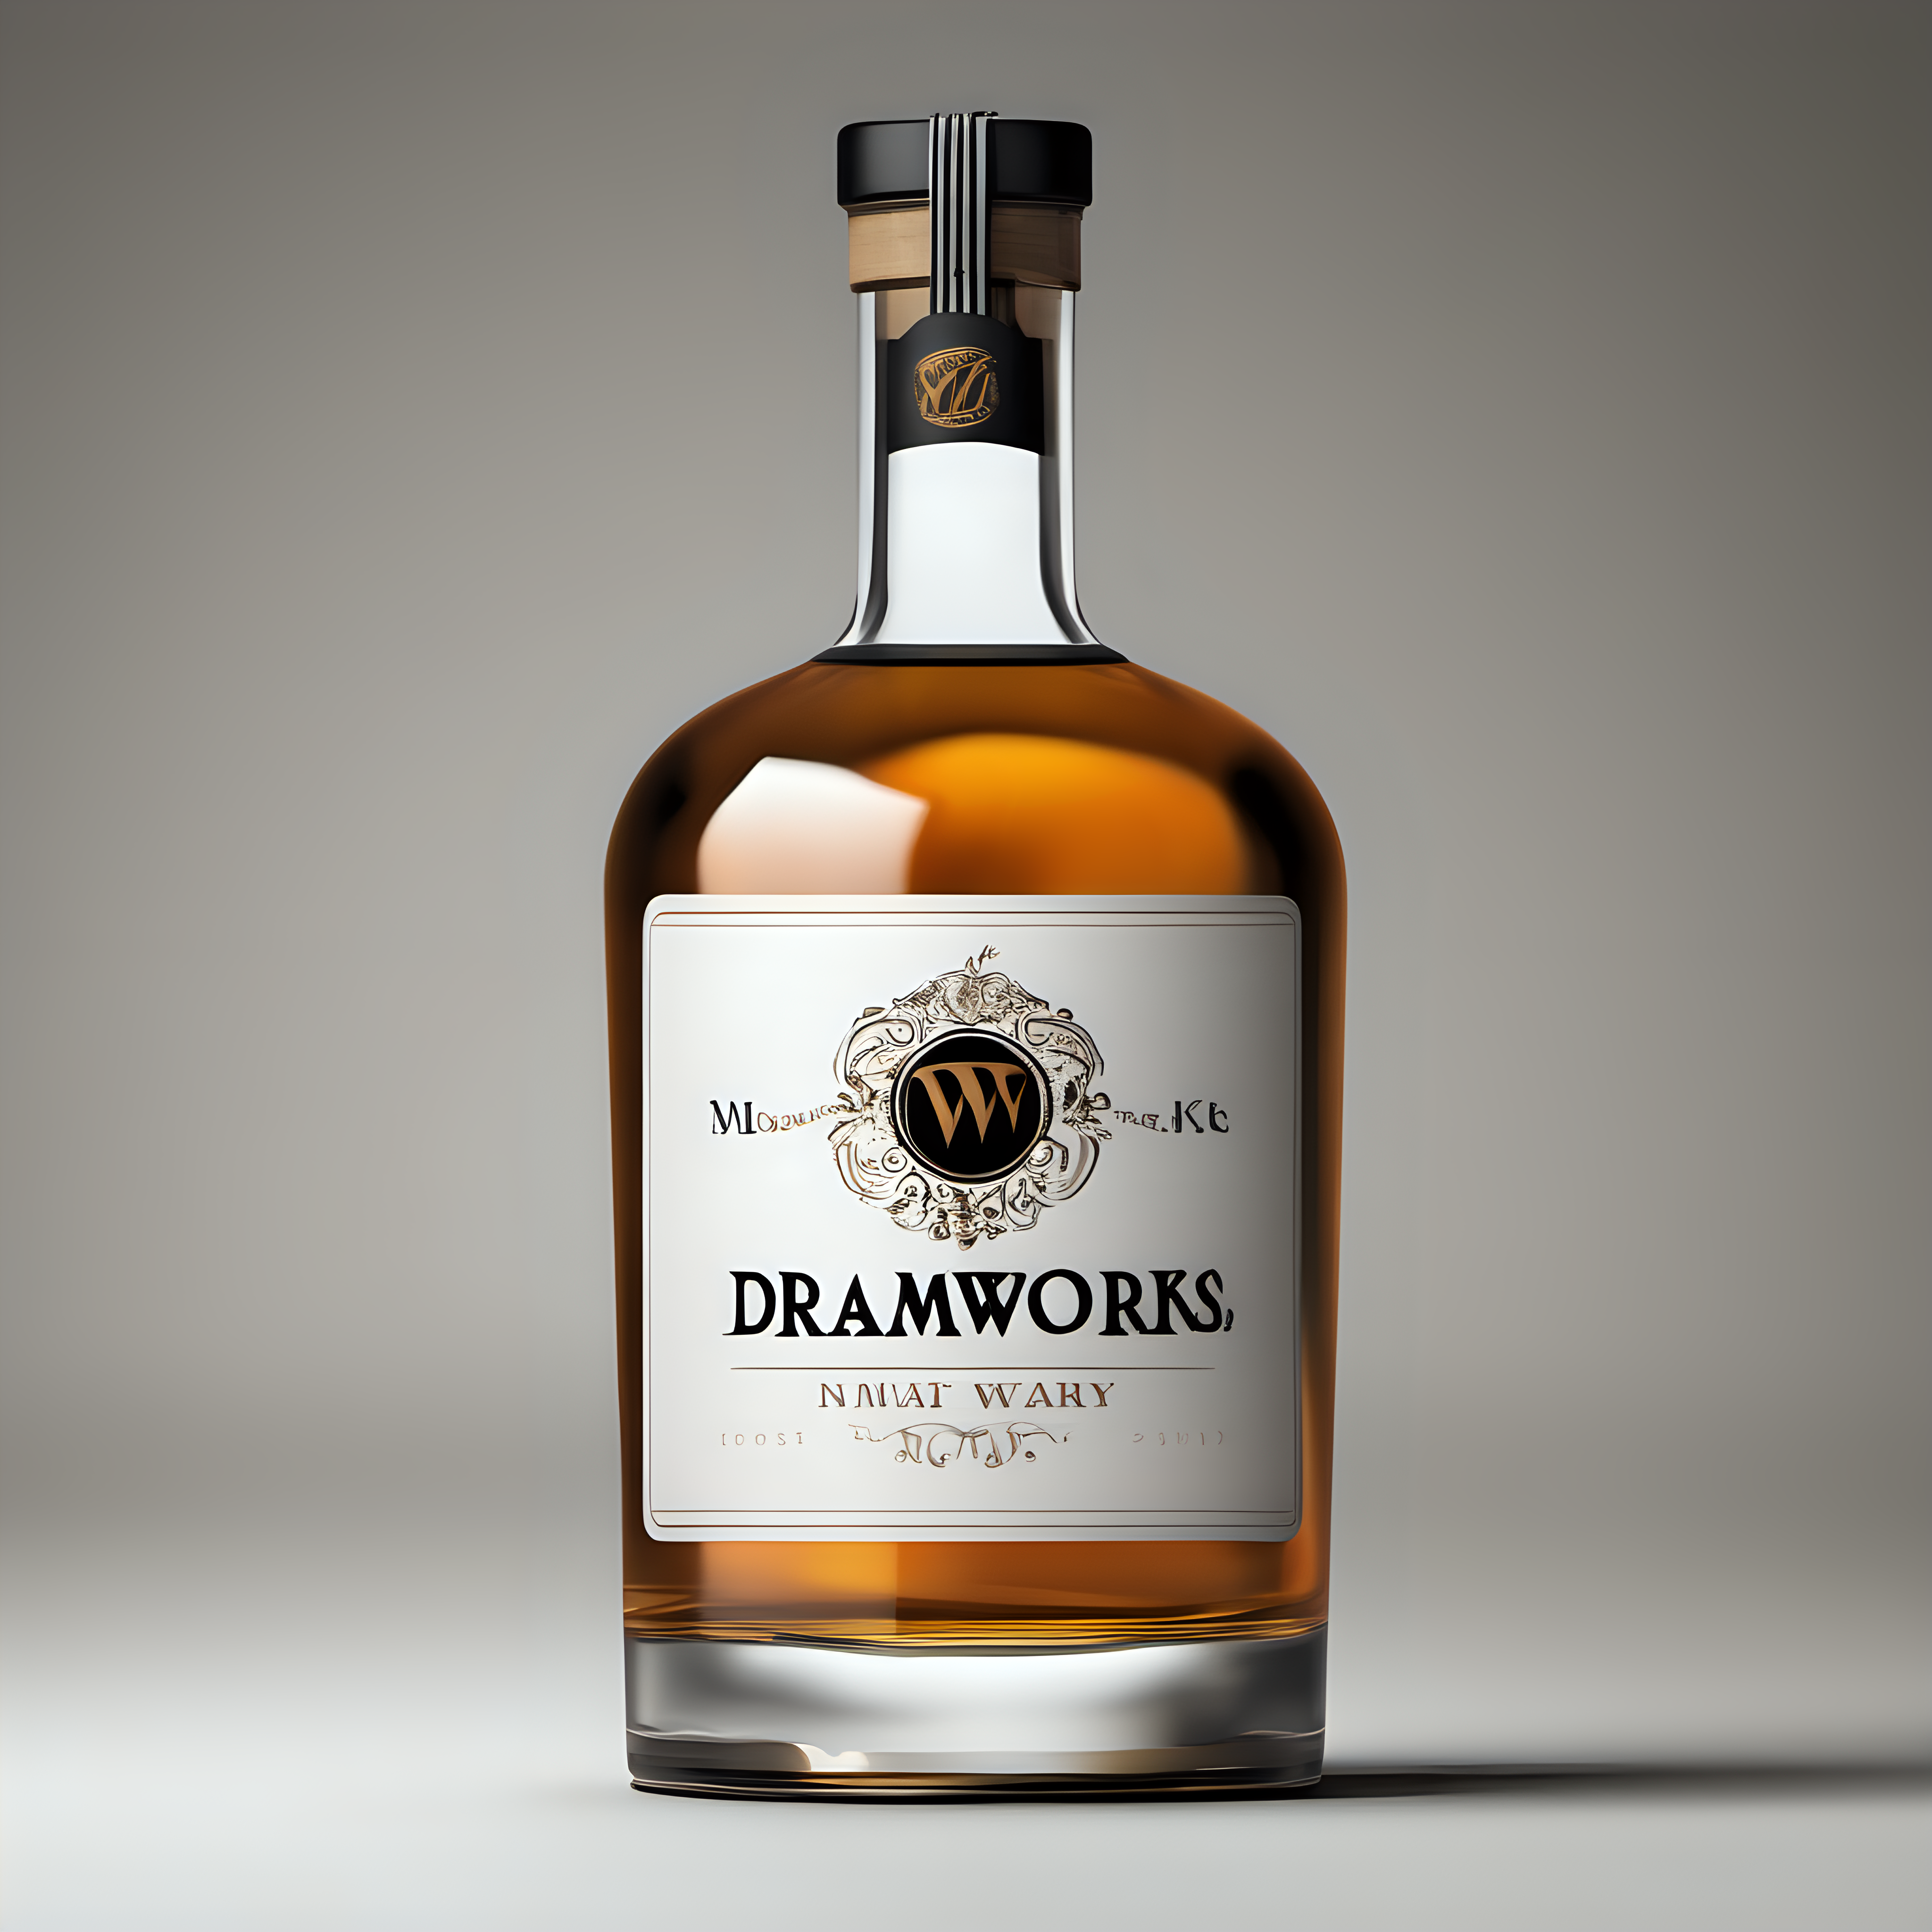 create a brand for a whisky company called "Dramworks" that looks fancy and very modern 
 